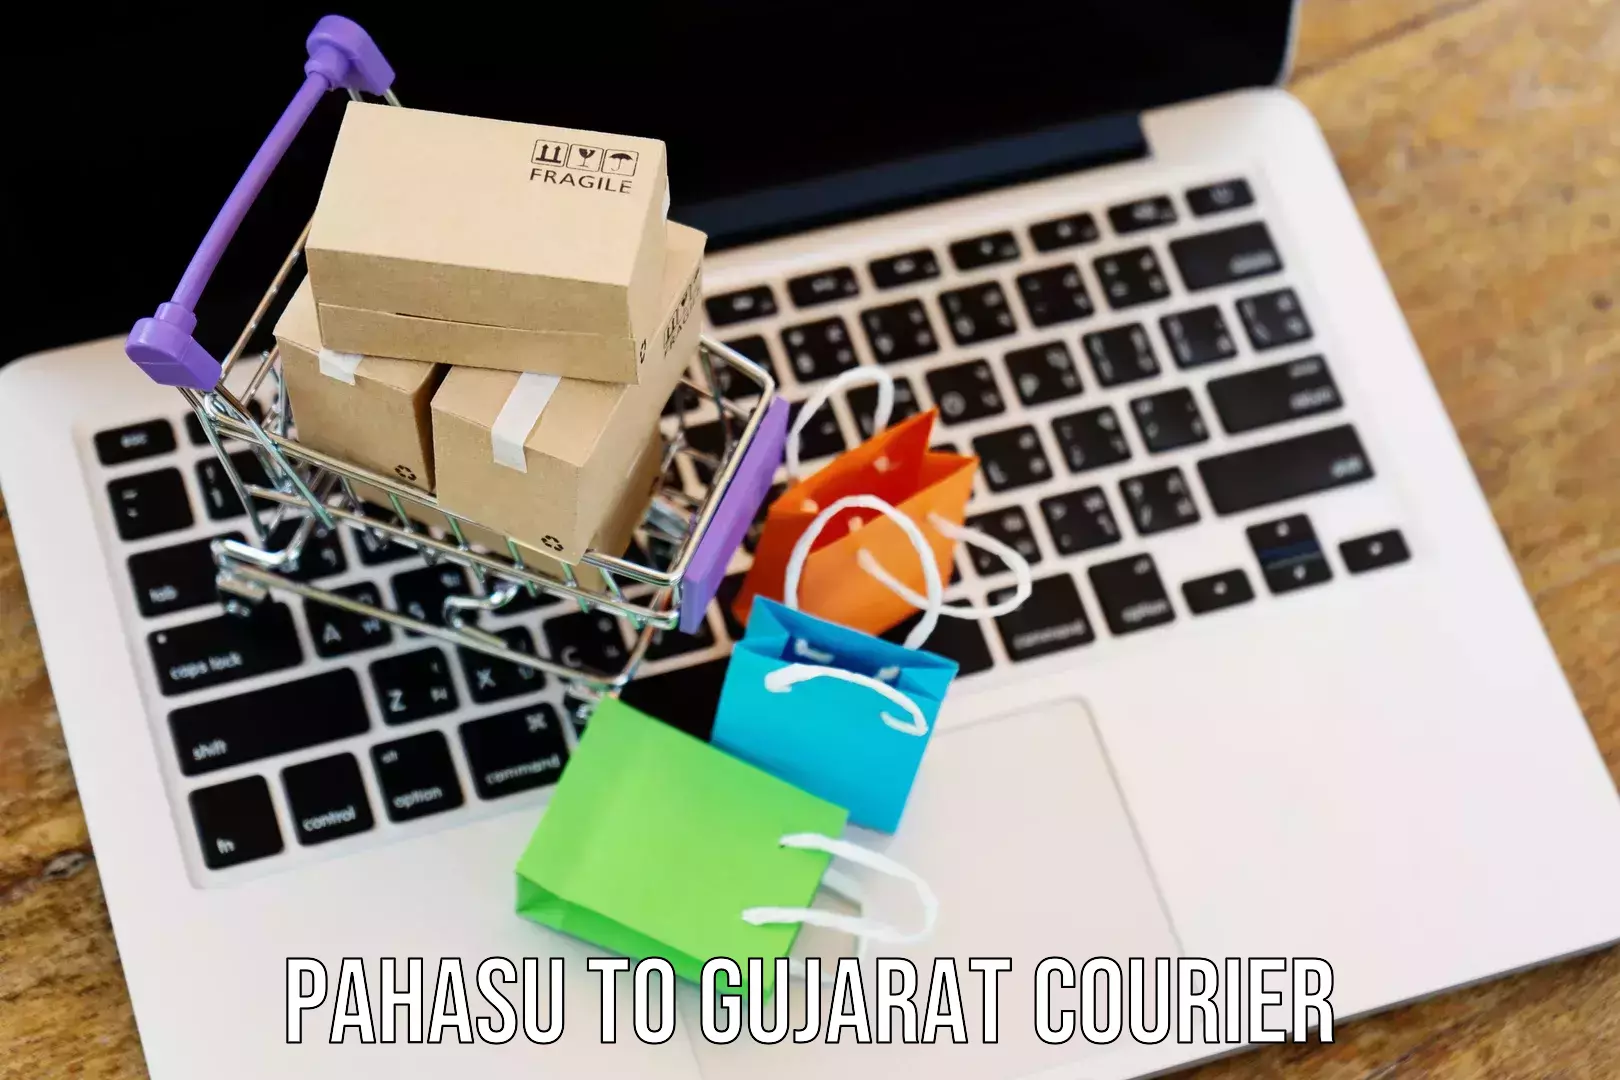 Full-service courier options Pahasu to Sami